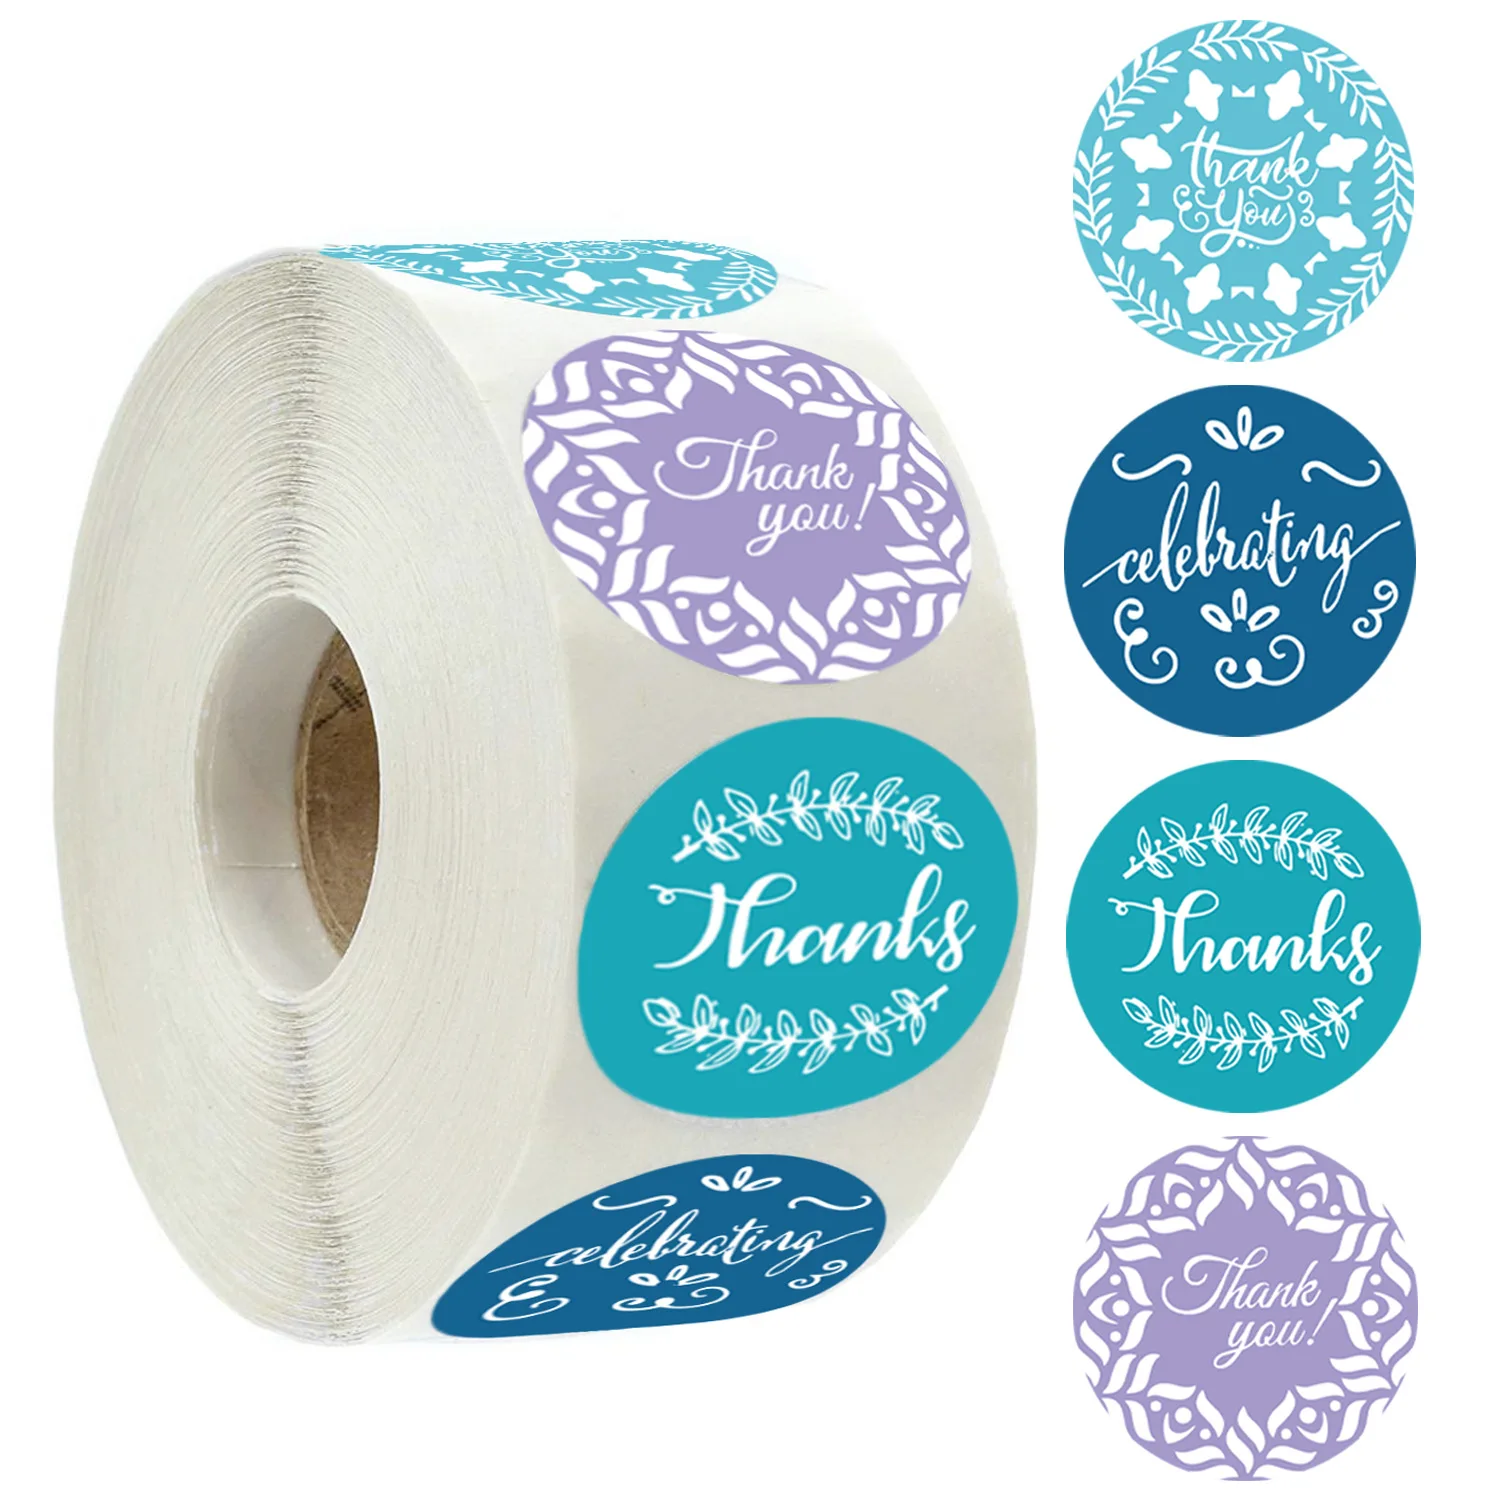 Stickers Fun Express 1 Piece Stickers Lt Blue Ribbon Roll Stickers Roll Stationery